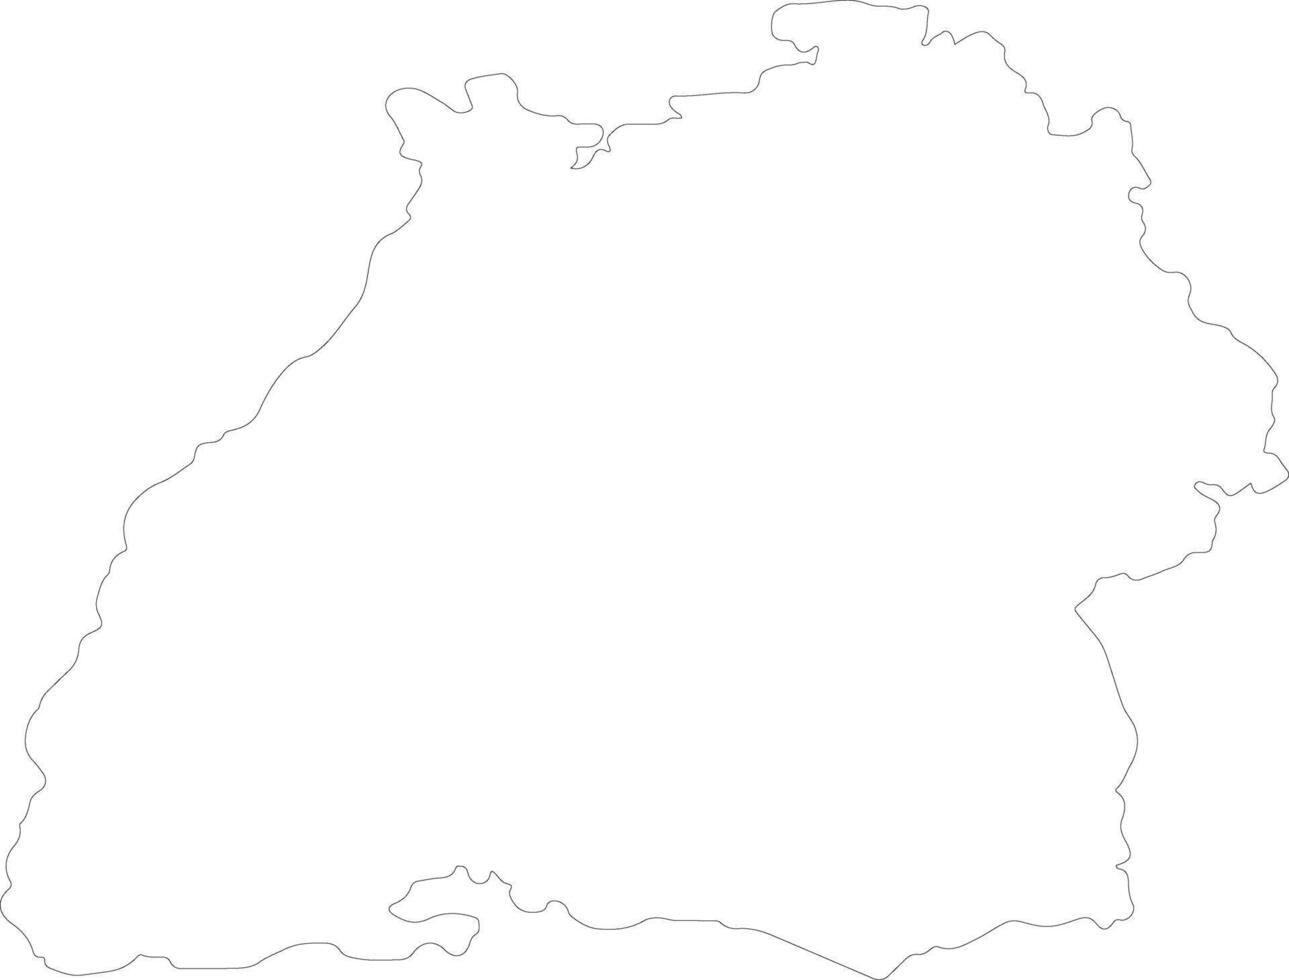 Baden-Wurttemberg Germany outline map vector